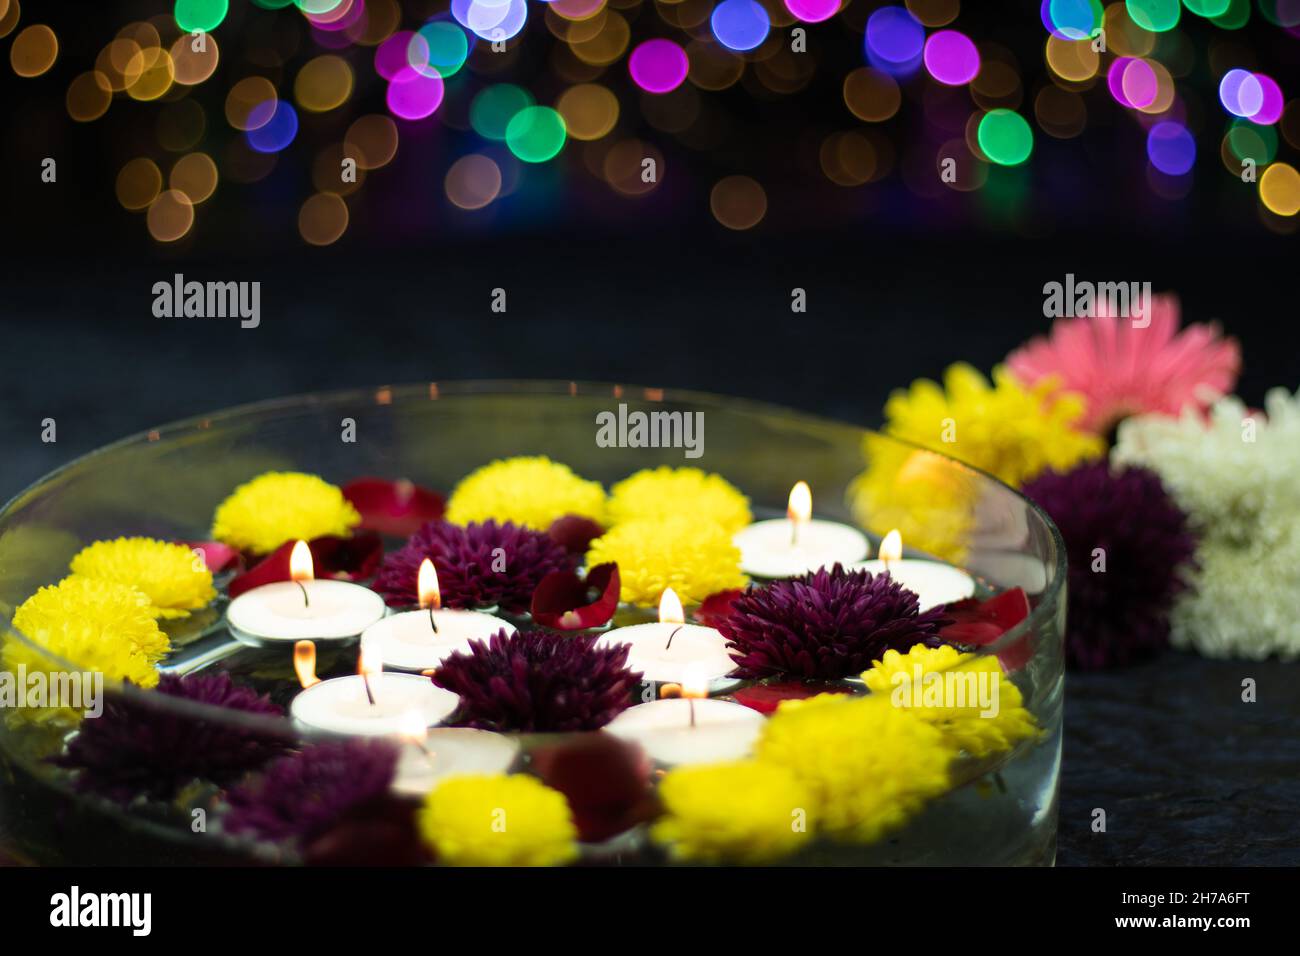 Floating Tealight Candles Illuminated In Decorative Urli Crystal Bowl Filled With Water And Flowers. Colorful Bokeh On Dark Background. Theme For Shub Stock Photo